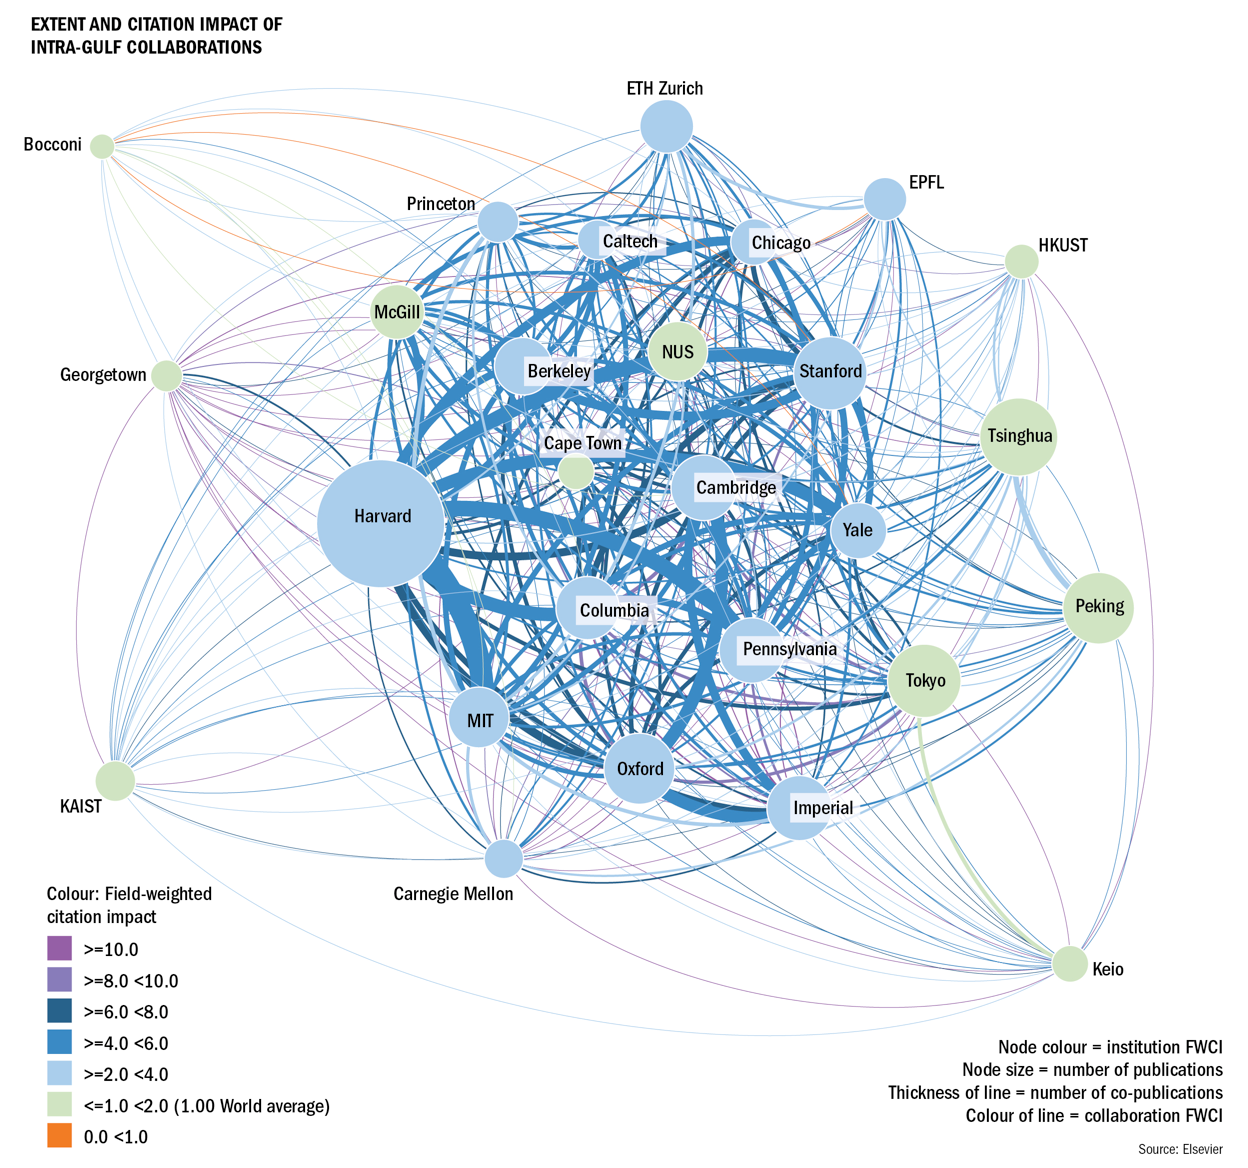 Enlarged view: Collaboration network of GULF universities